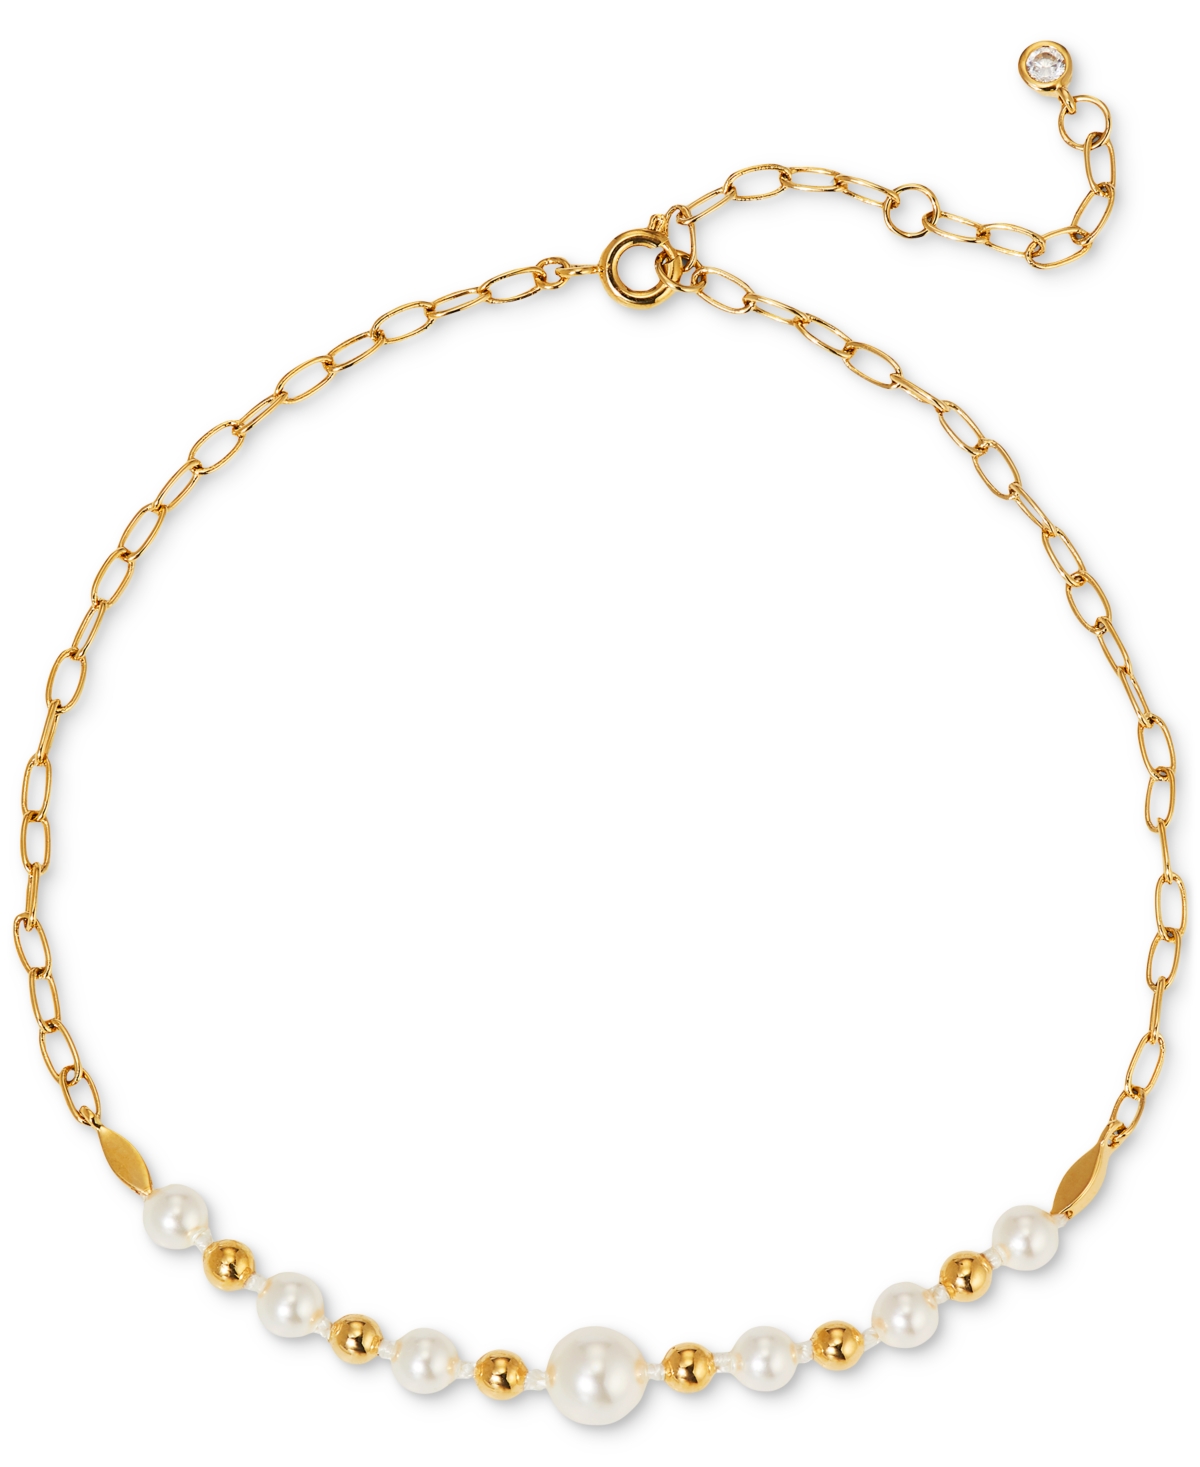 Ajoa by Nadri 18k Gold-Plated Imitation Pearl Ankle Bracelet - Gold